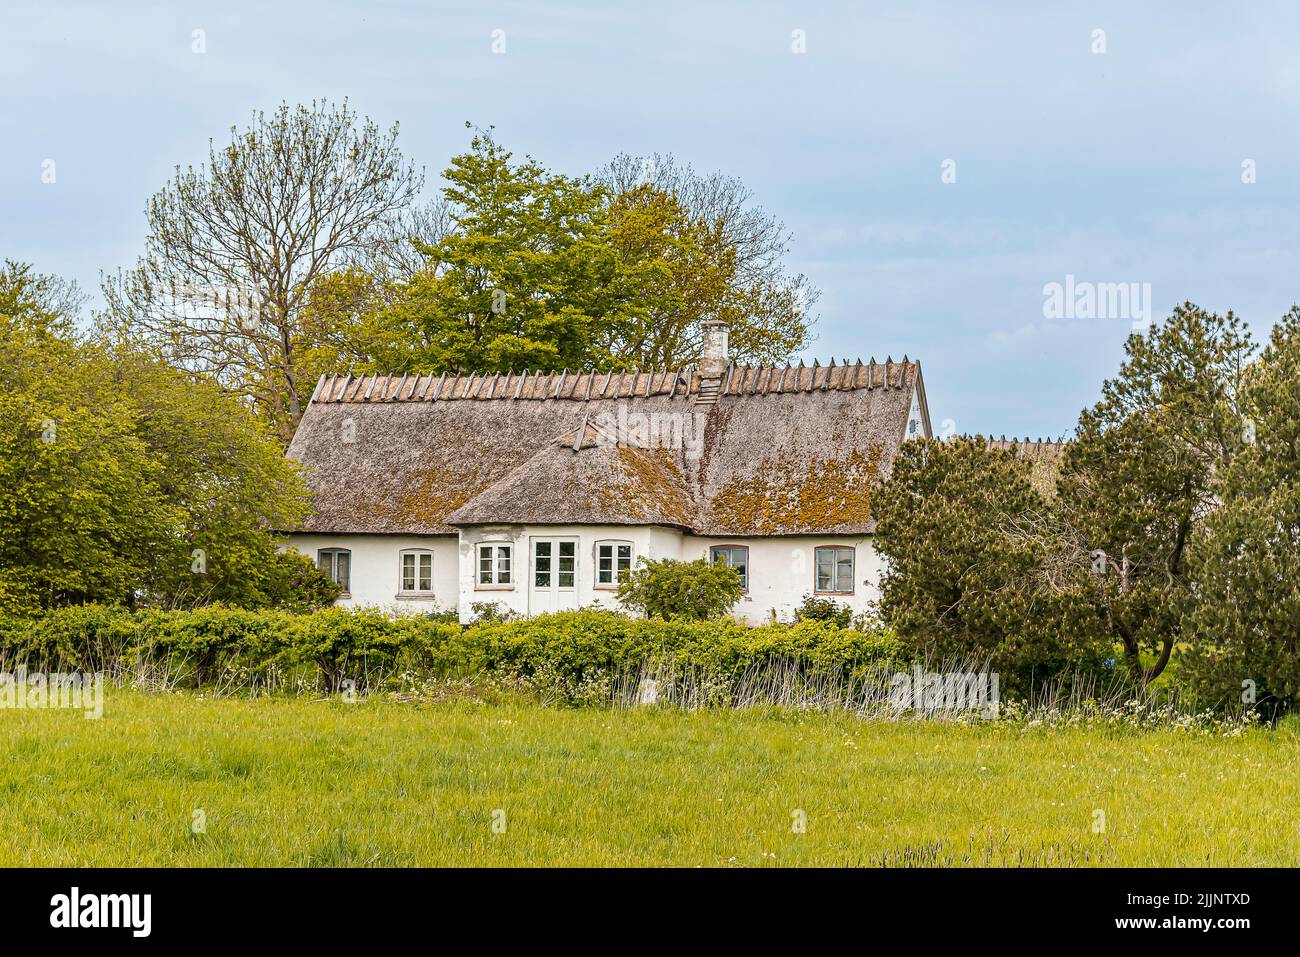 old country house with thatched roof, Denmark, May 10, 2020 Stock Photo